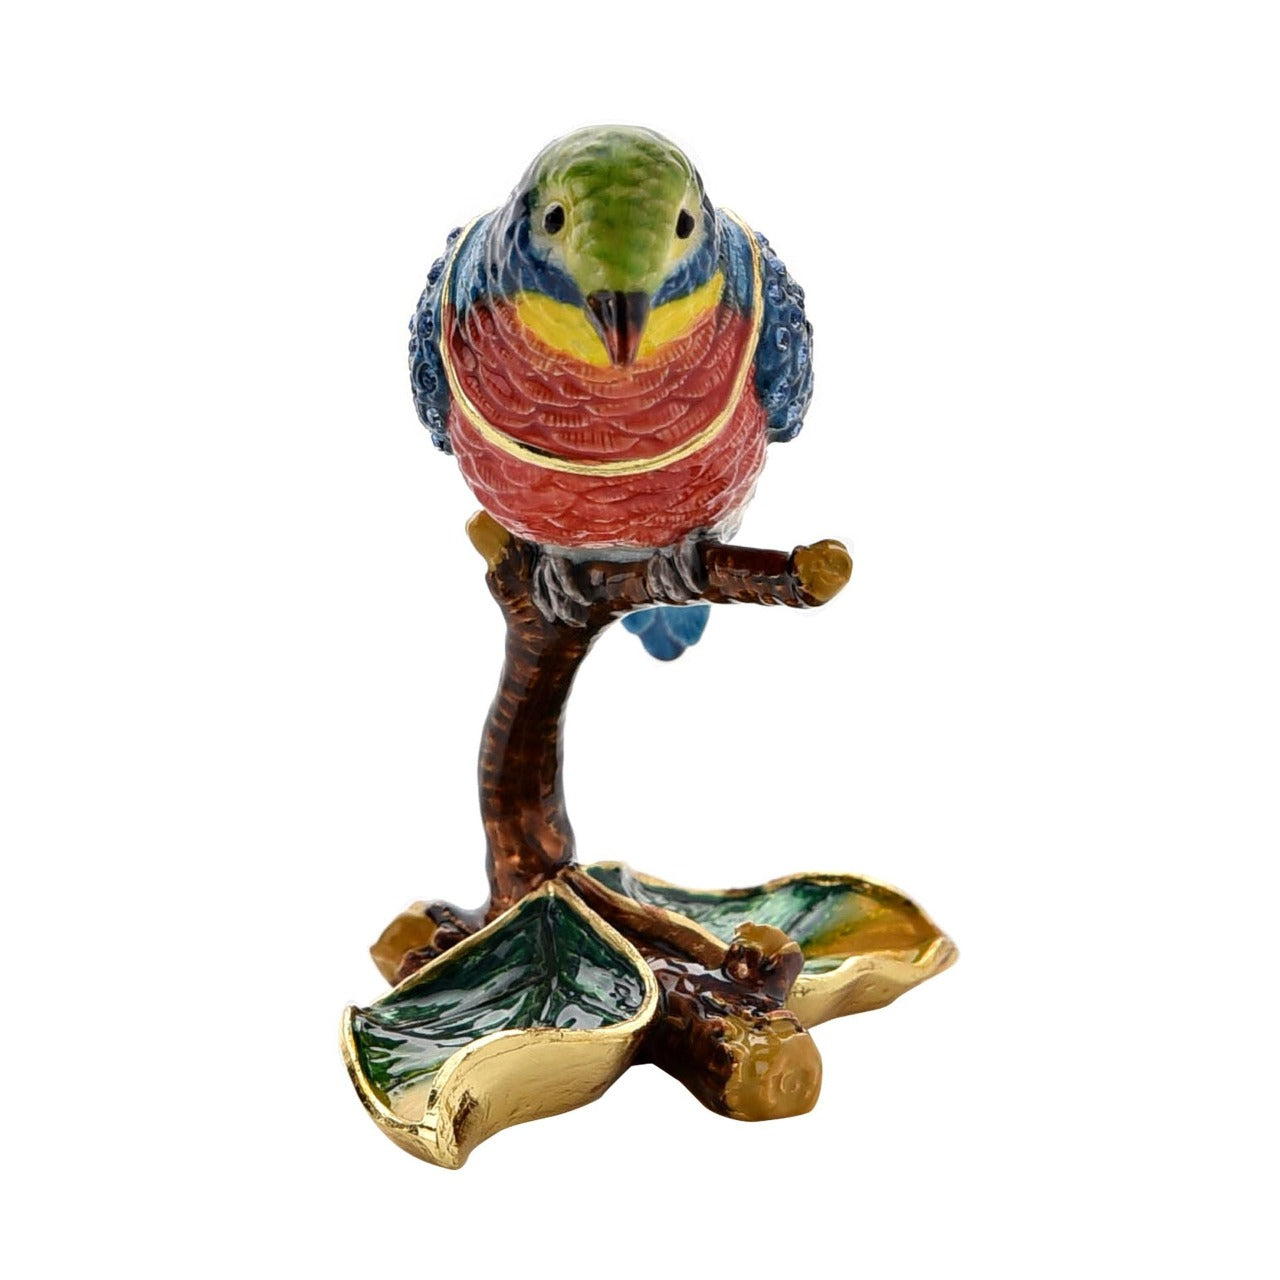 Treasured Trinkets - Blue and Red Bird on Branch  A bird on branch trinket box from Treasured Trinkets by STRATTON®.  The eye-catching trinket box makes a true statement piece for any bedroom with its colourful bird sitting upon a branch.